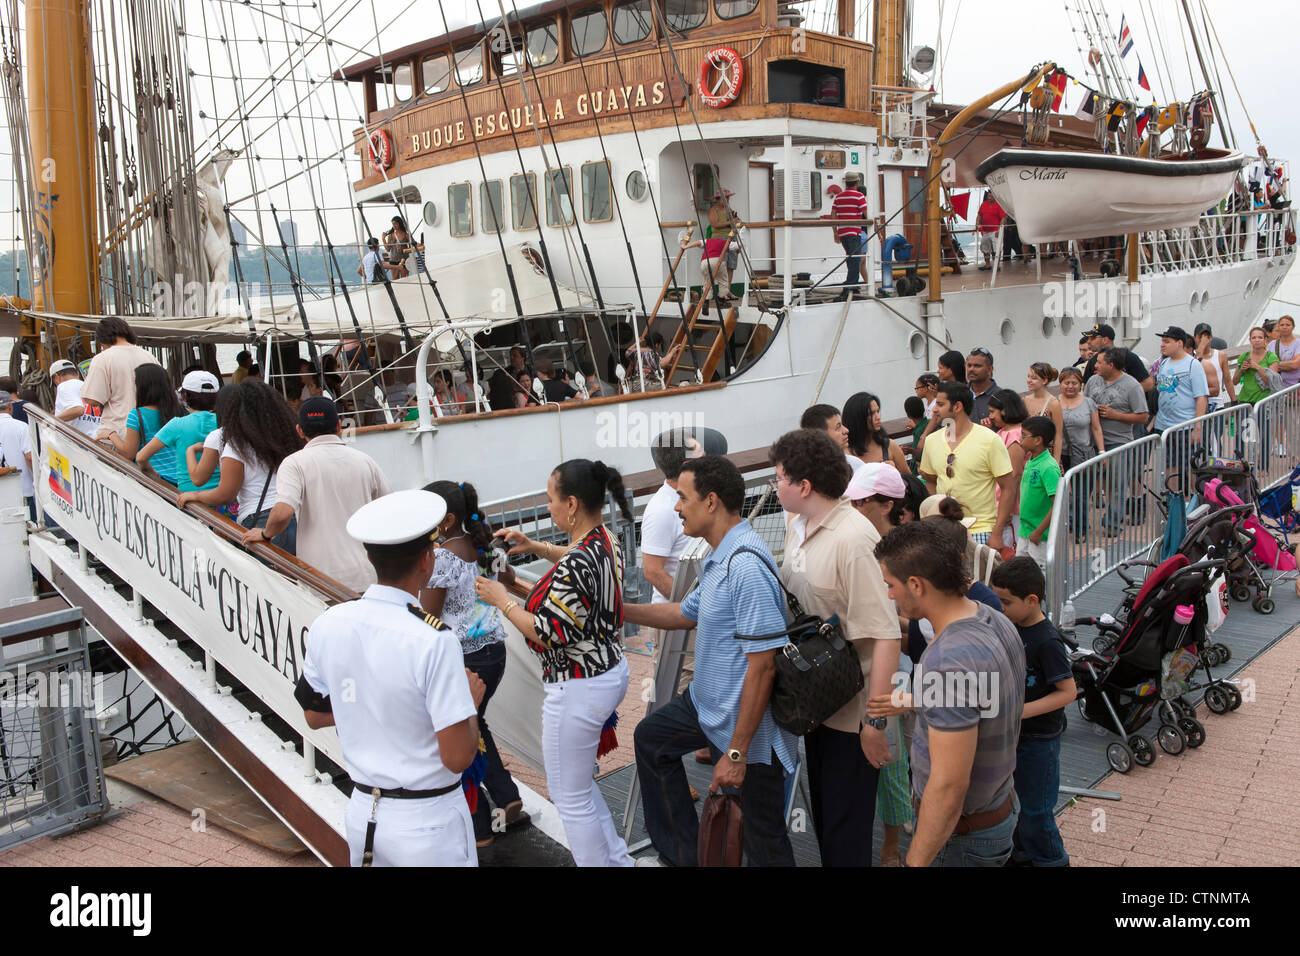 Visitors stand in line to board the Ecuadorian training ship BAE Guayas during the 2012 Fleet Week in New York City. Stock Photo